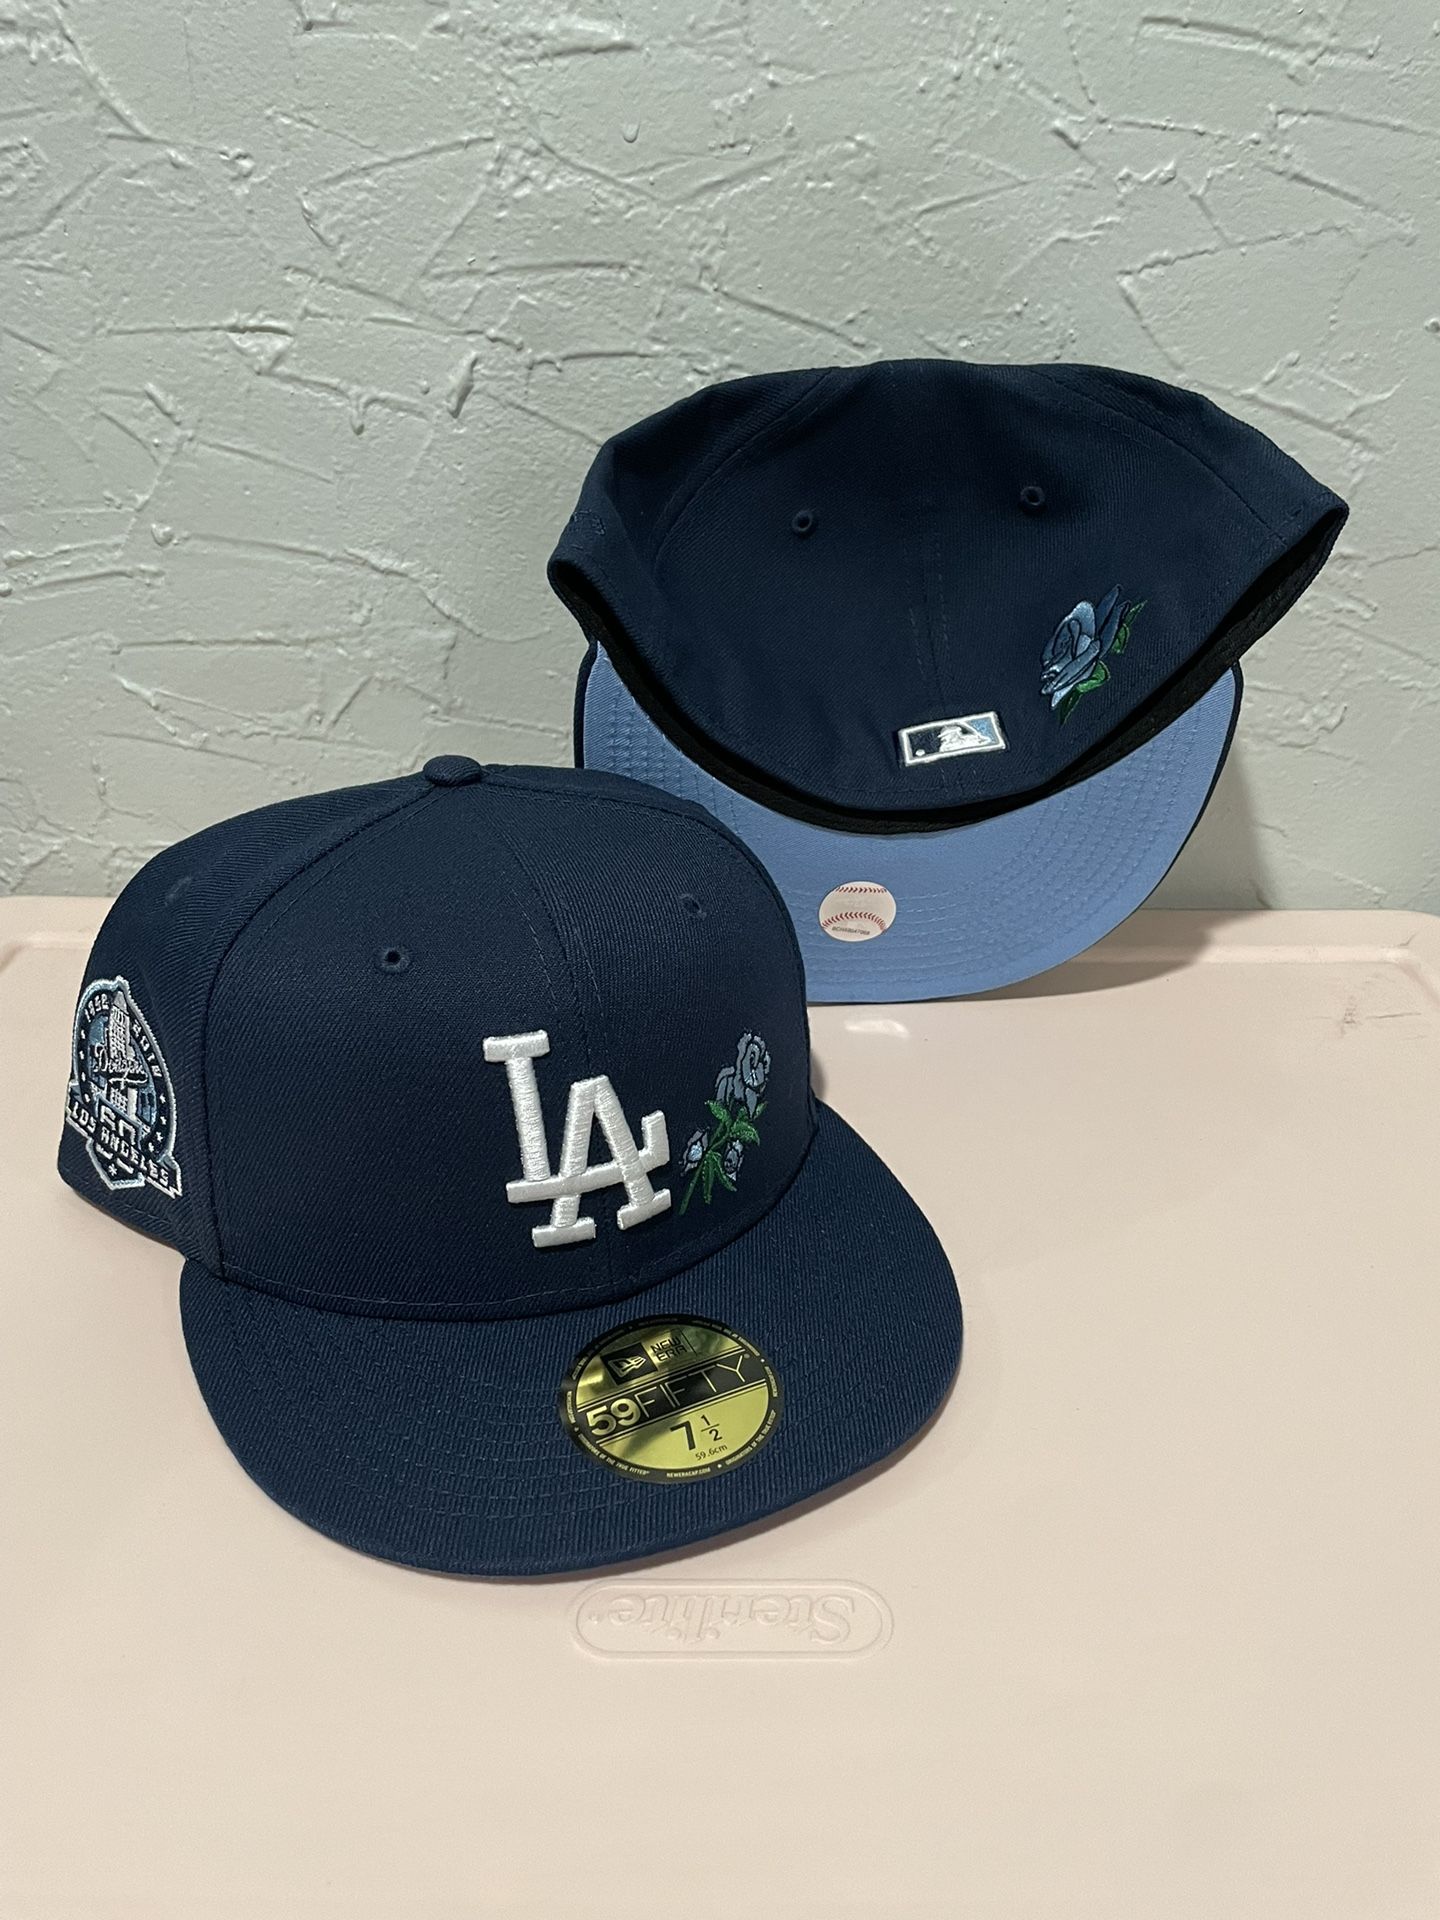 MLB New Era Los Angeles Dodgers Dark Blue 60th Anniversary Patch Rose Patch UV 59fifty Fitted Hats Size 7 3/8 And 7 1/2 